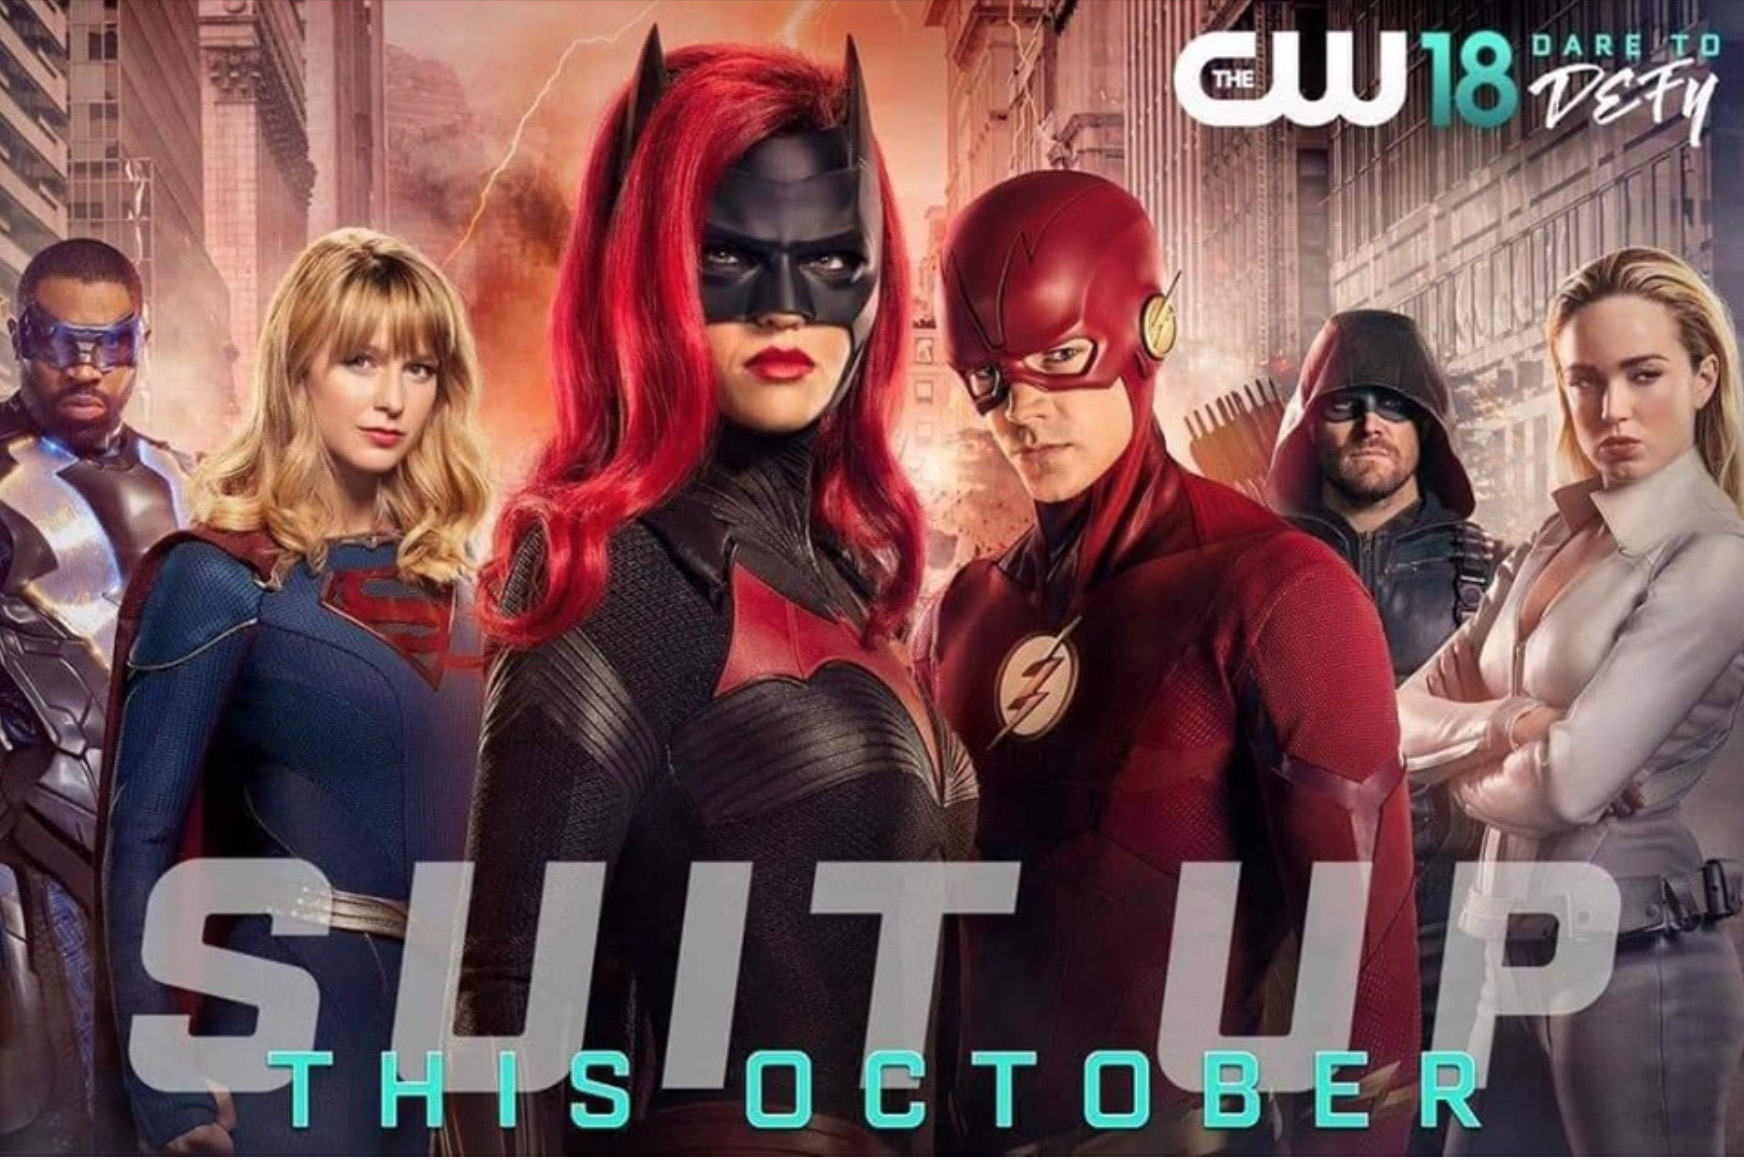 Let The Speculation Begin! CW’s DC Teaser Trailers Raises Some Questions